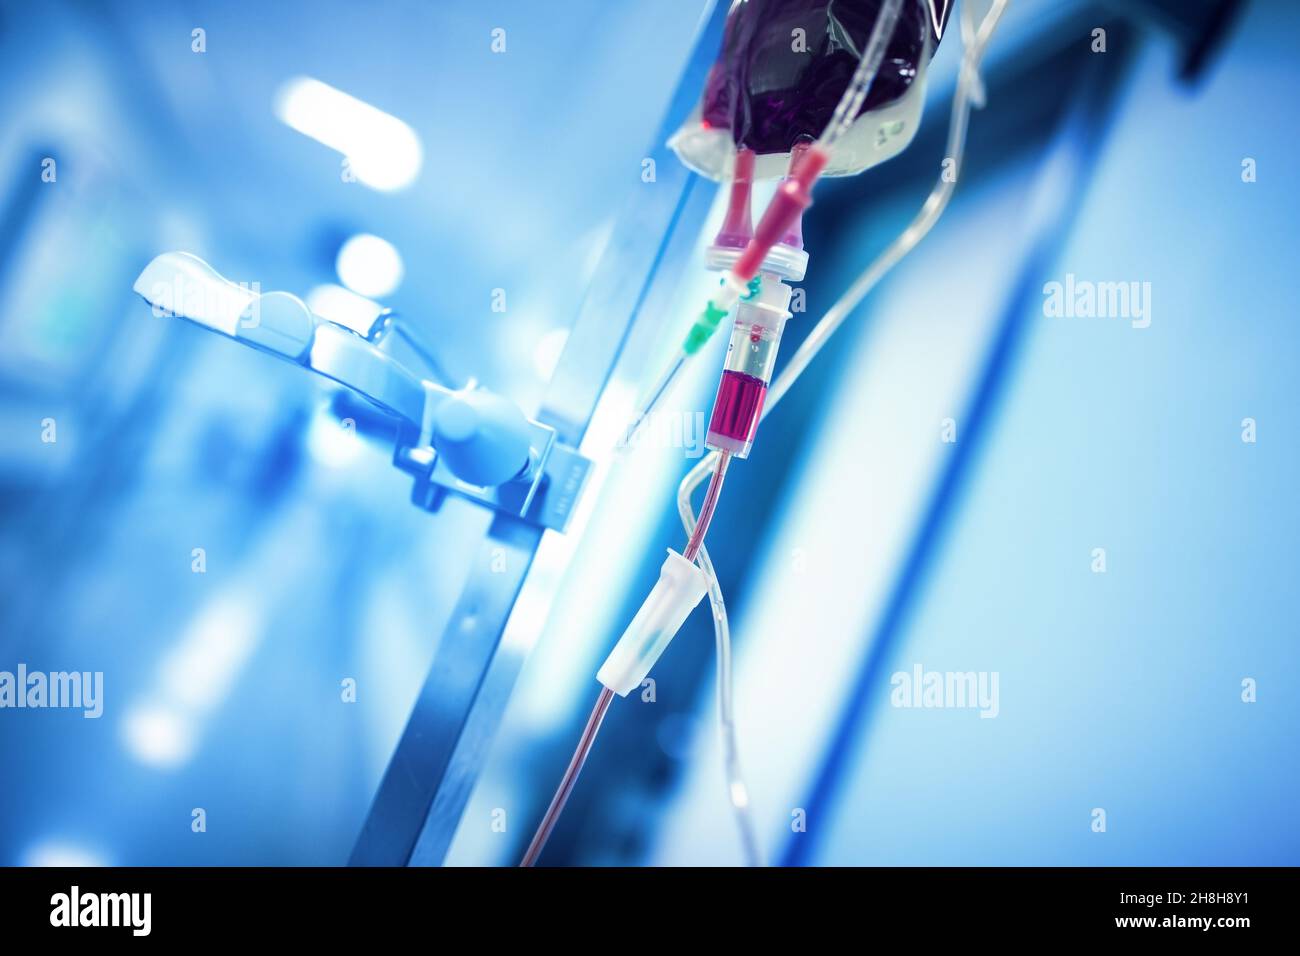 Blood transfusion system hanging on the iron pole ready to use in the hospital hall. Stock Photo